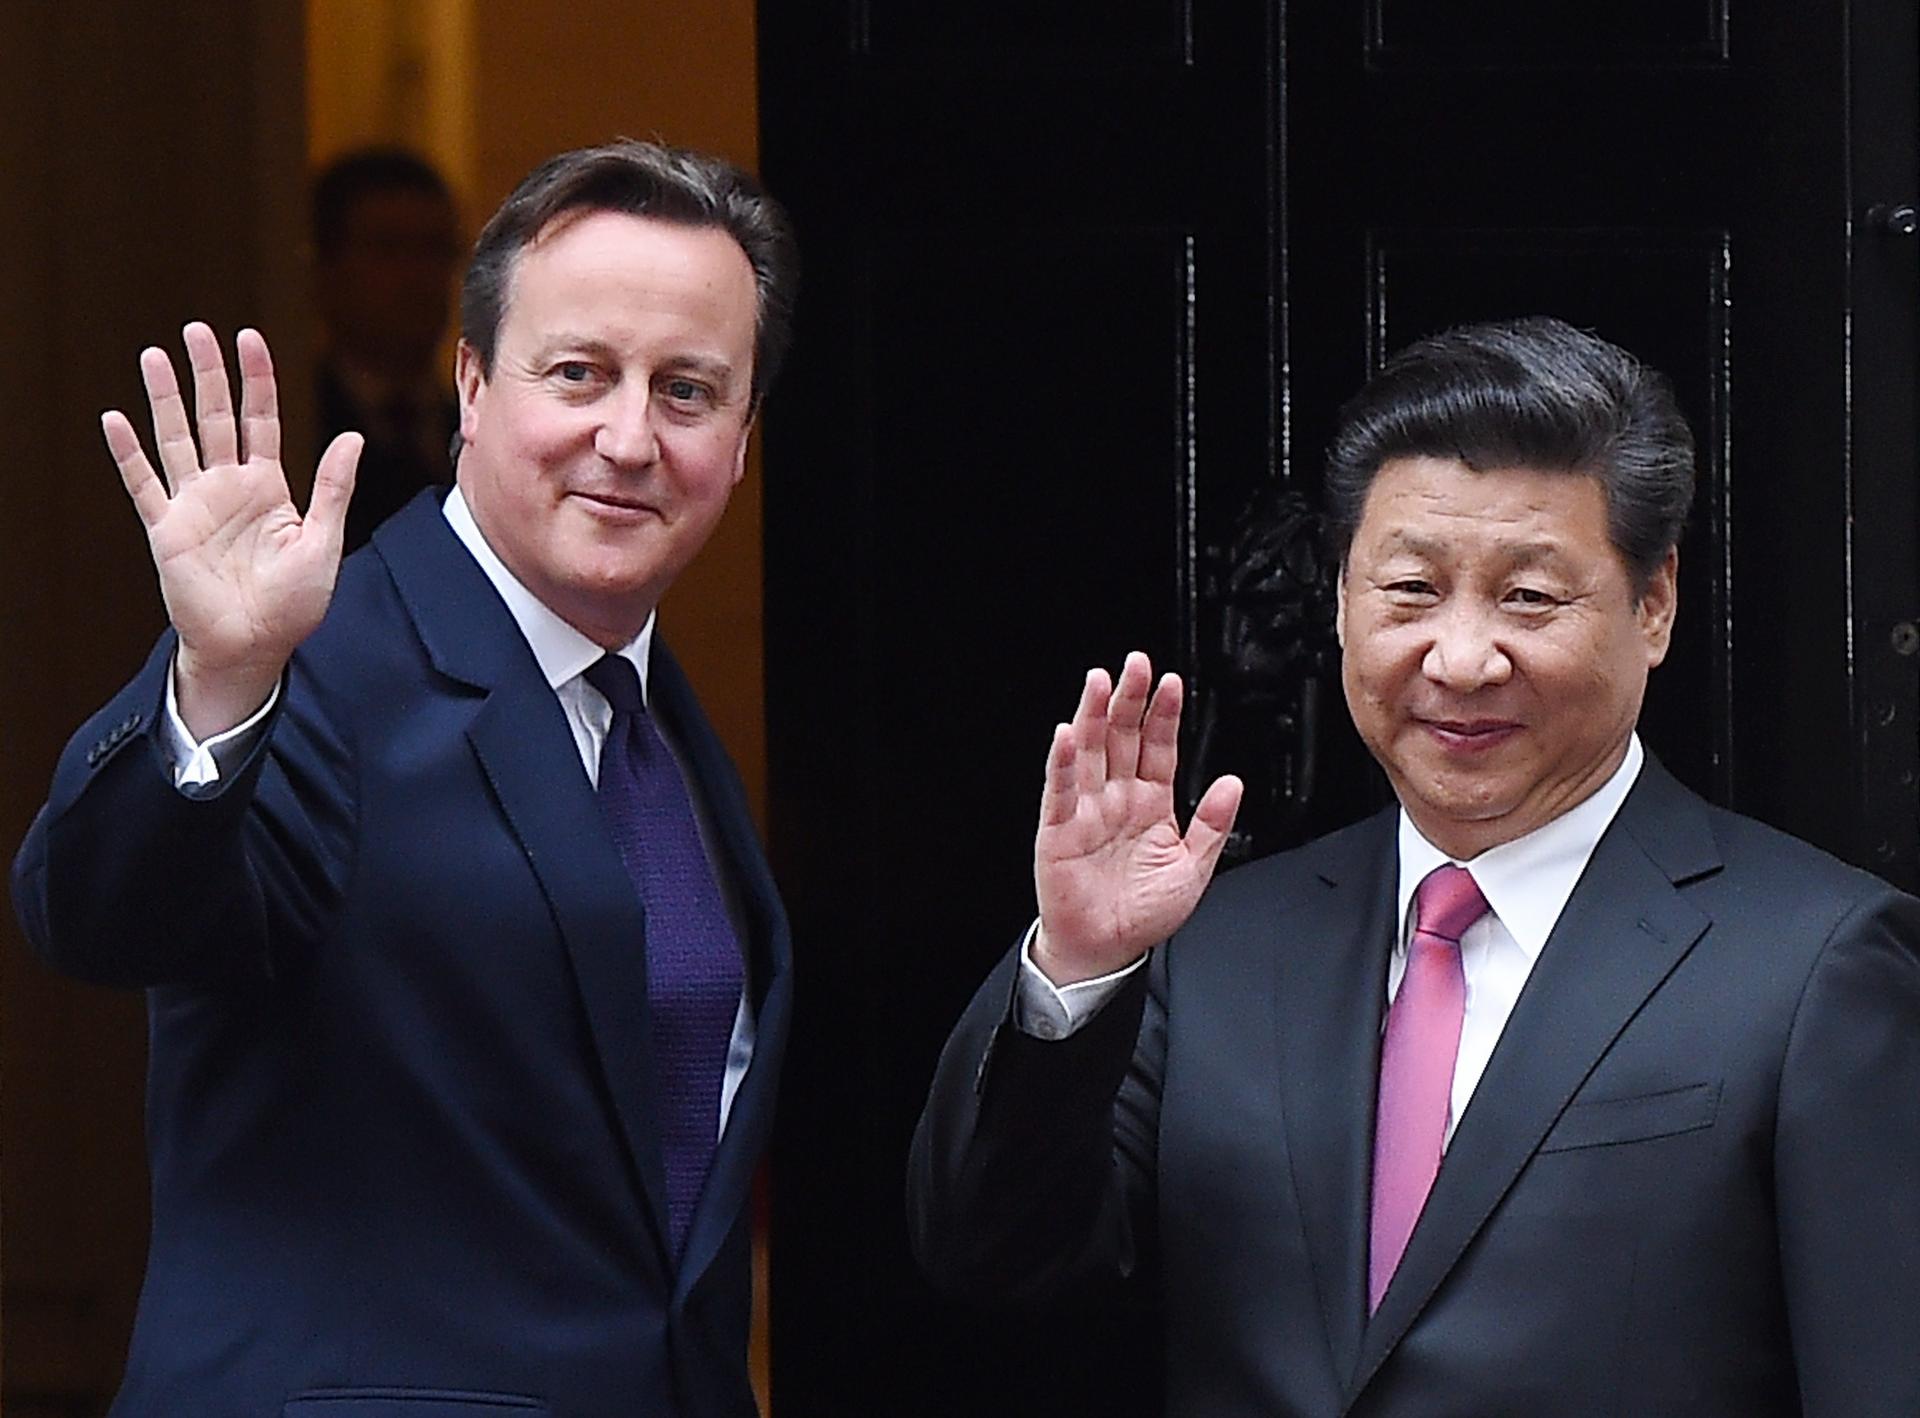 British Prime Minister David Cameron welcomes President Xi Jinping to 10 Downing Street yesterday.Photo: EPA